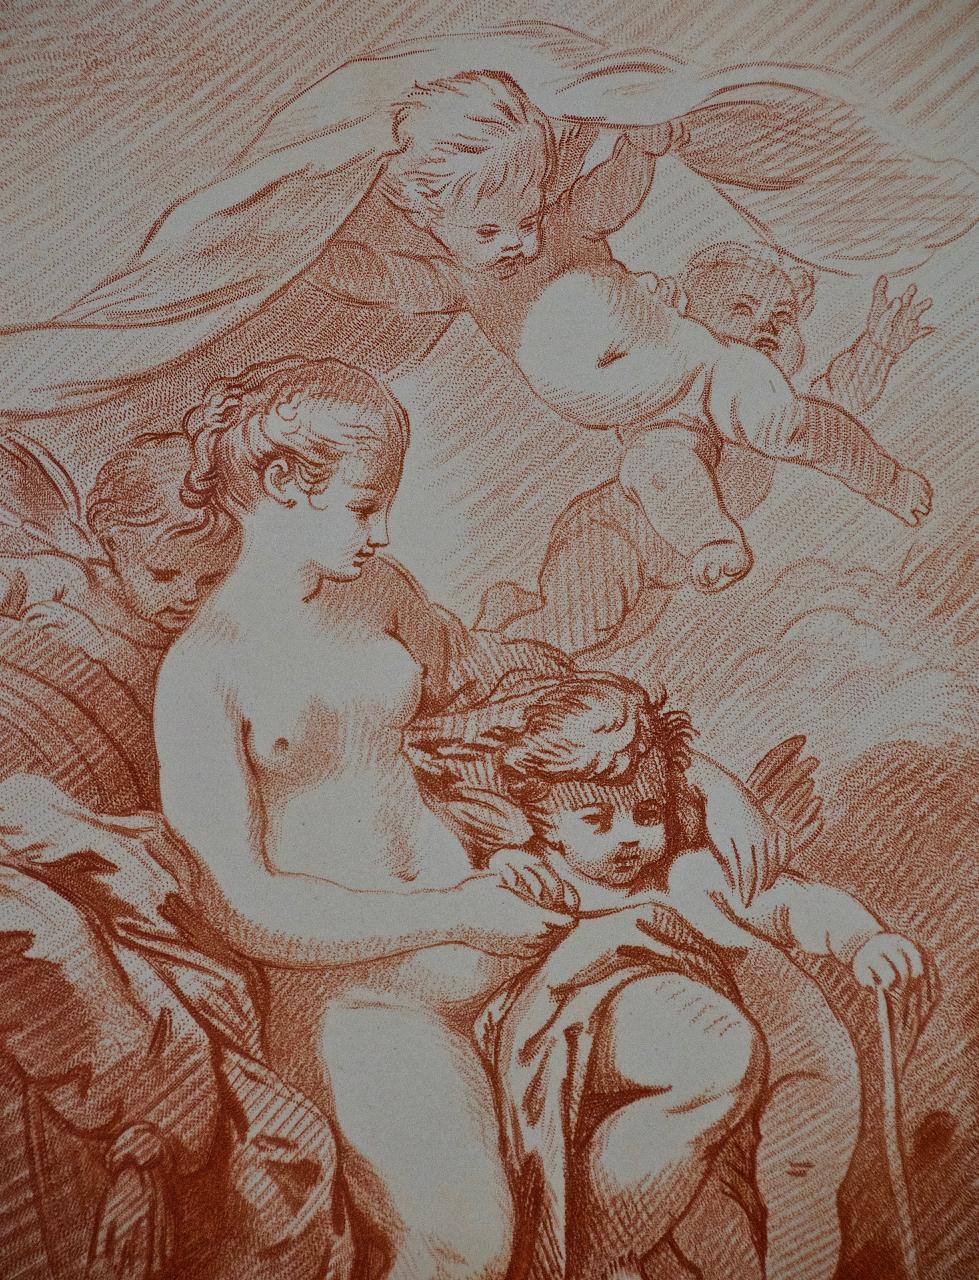 A Pair of Romantic Etchings of Women with Cherubs by Pequegnot after Boucher  2